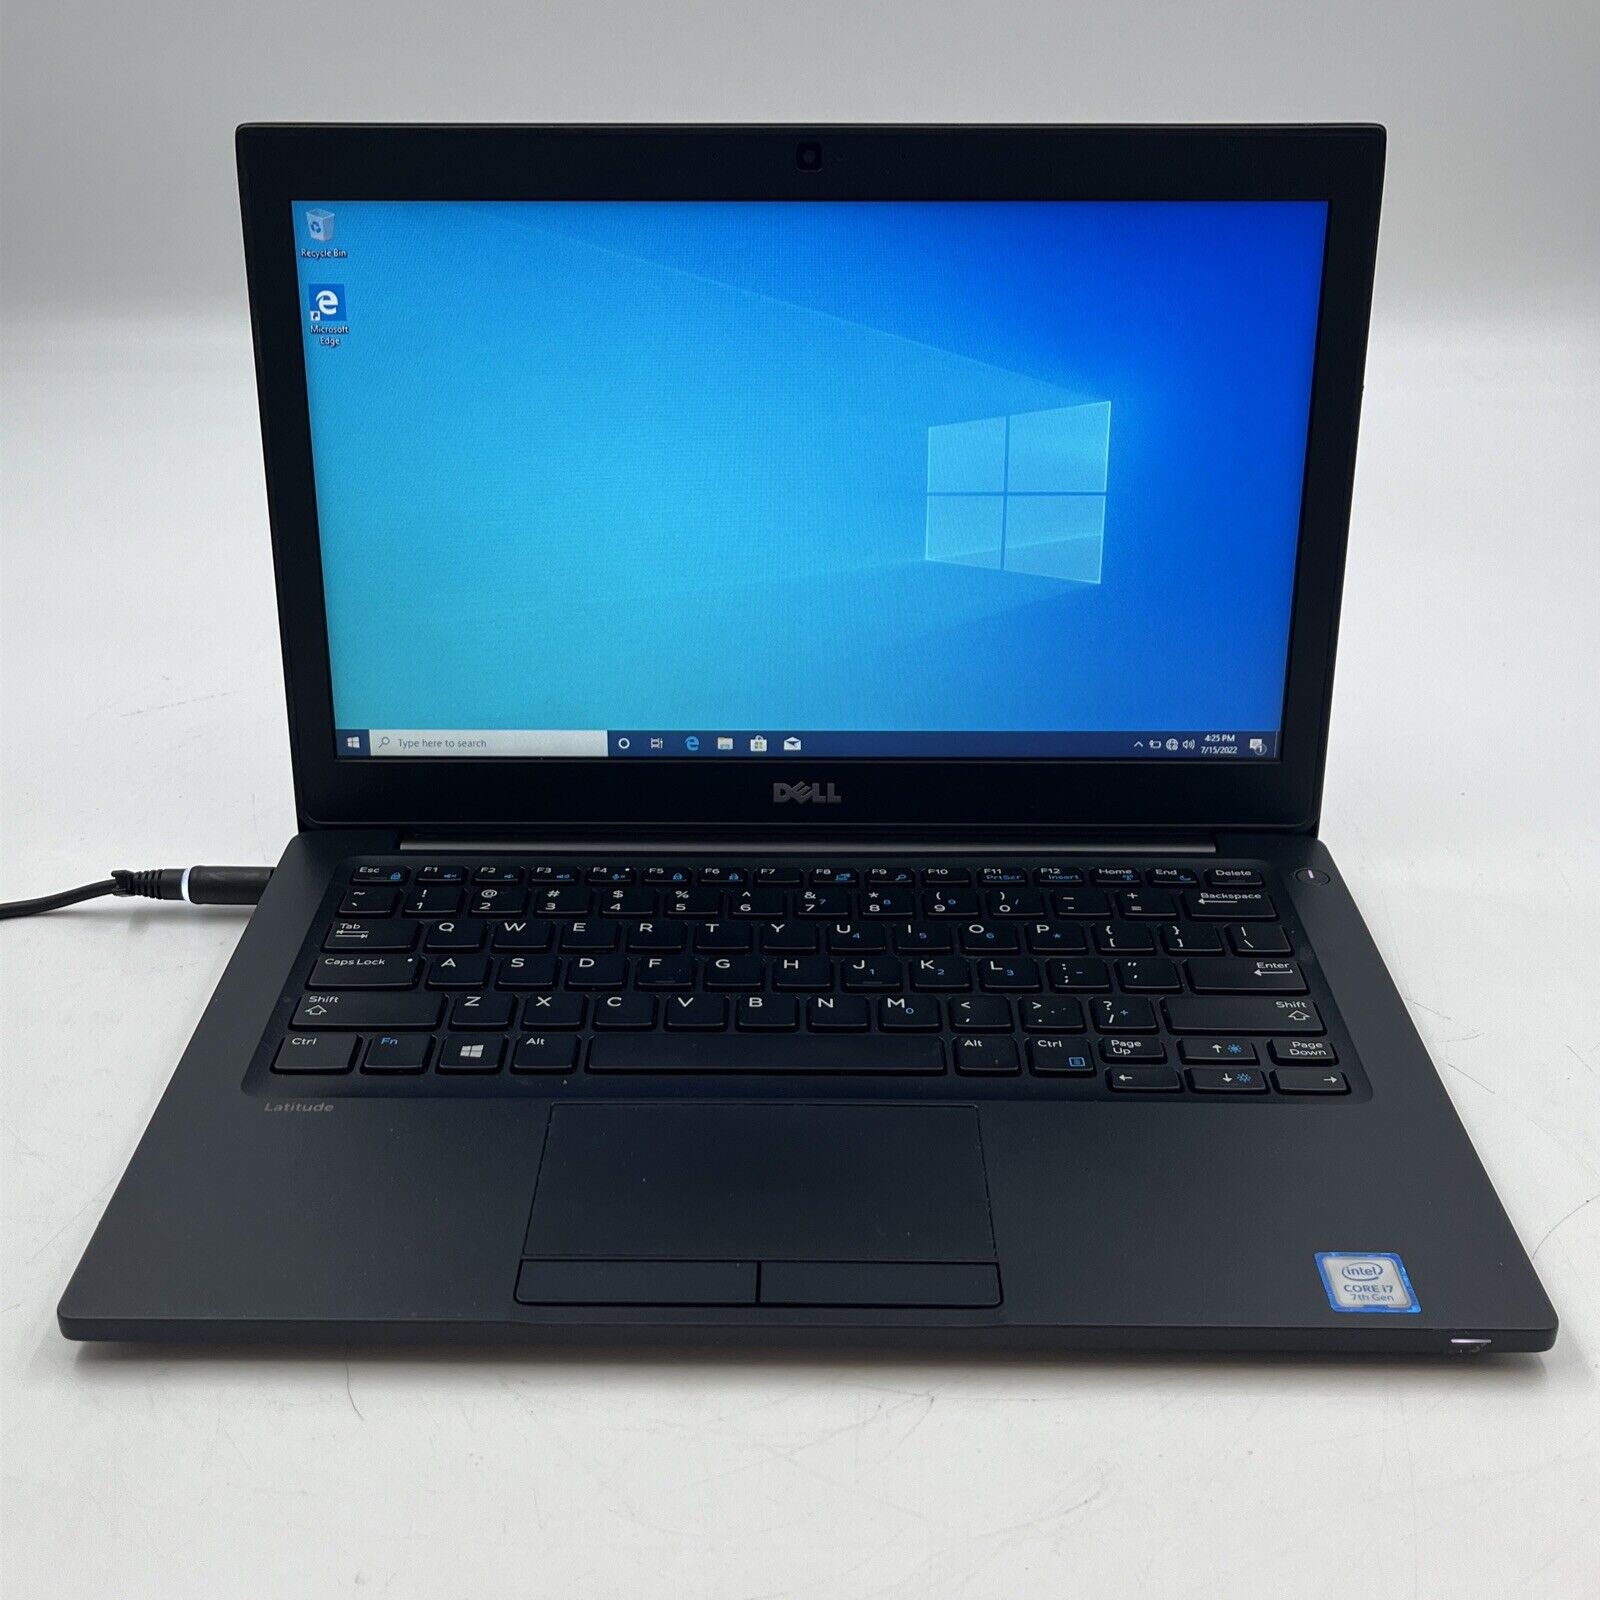 Dell Latitude 7280 i7 2.8GHz 8GB RAM 128GB SSD W10 Pro Good Battery Charger